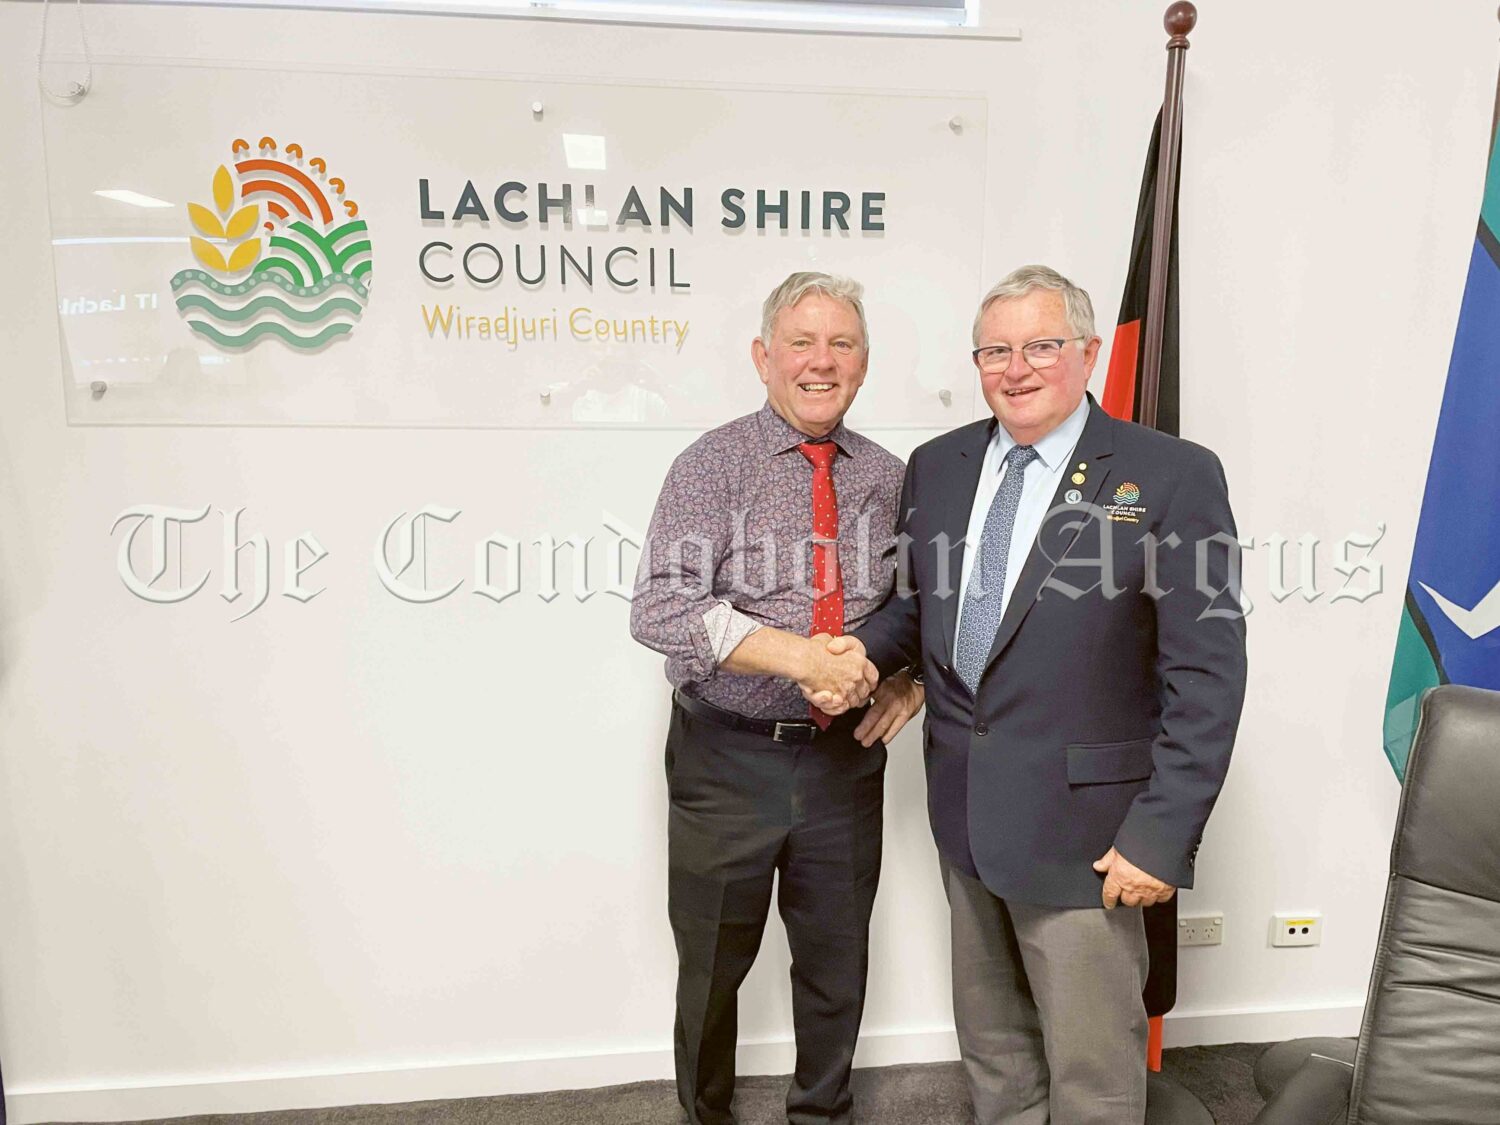 Councillor Paul Phillips (left) was elected as the Mayor of Lachlan Shire at the Lachlan Shire Council meeting on Wednesday, 27 September. Councillor John Medcalf OAM (right) was elected Deputy Mayor. Image Credit: Melissa Blewitt.